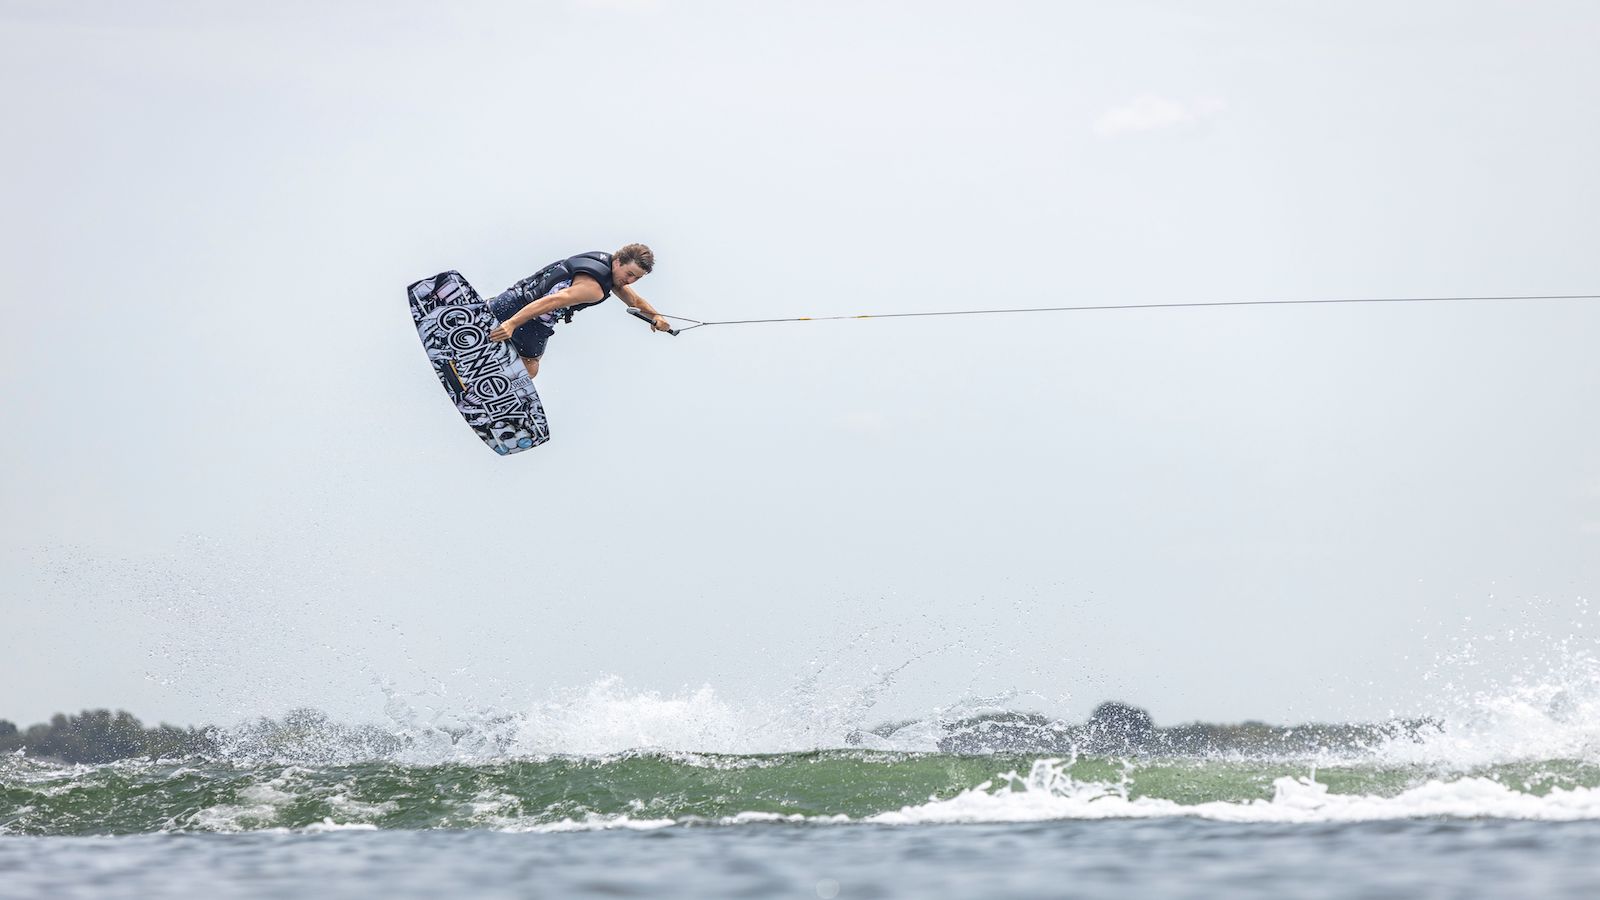 Connelly S/S 22 Wakeboard Hardgoods